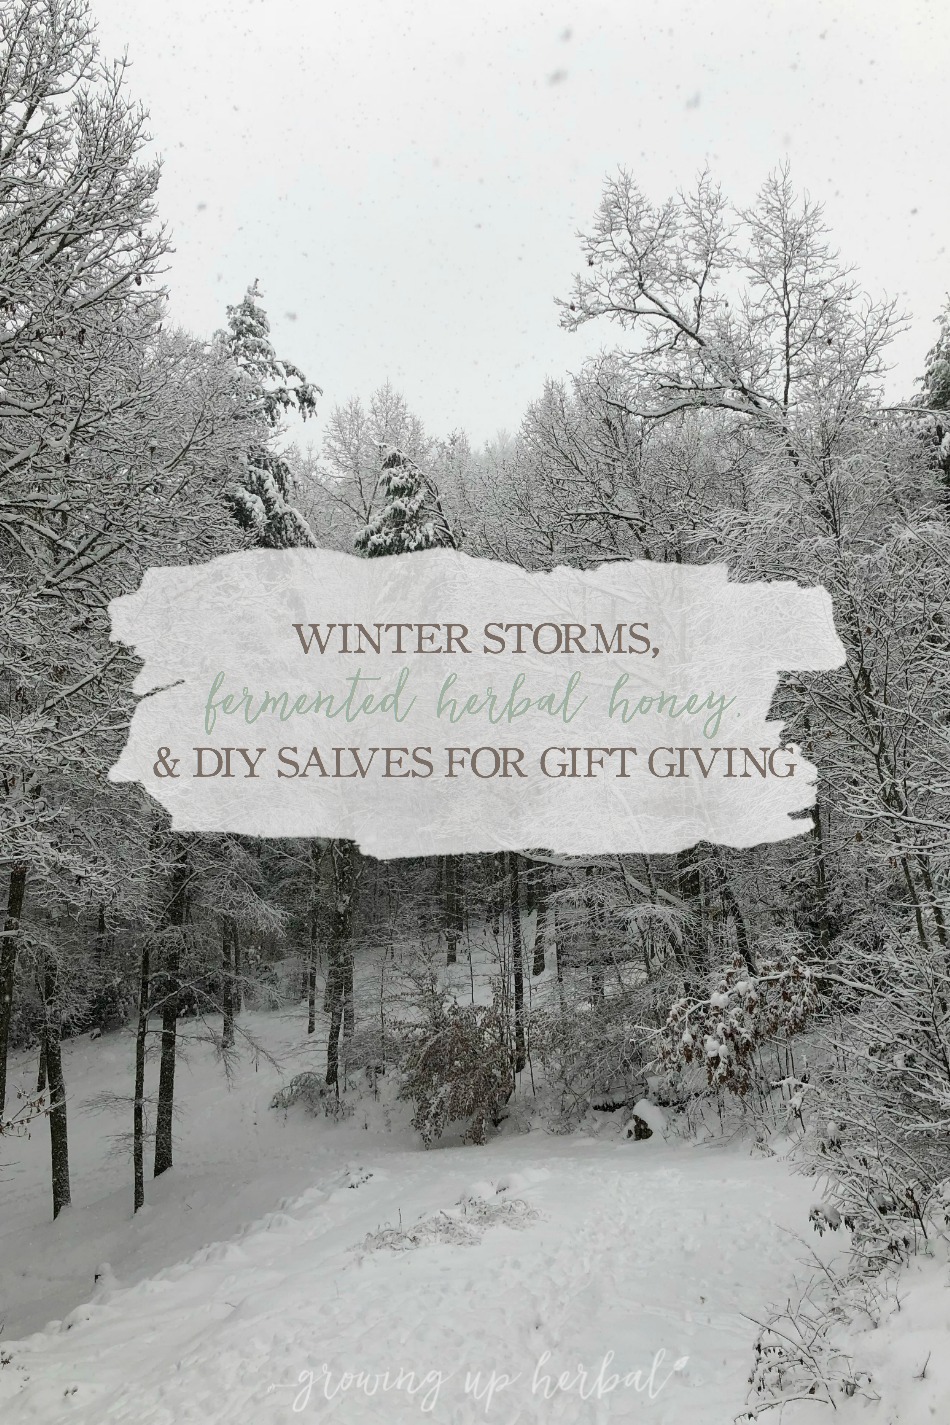 Winter Storms, Fermented Herbal Honey Recipe, and DIY Salves for Gift Giving | Growing Up Herbal | Come see what one of my bi-monthly “letters” is like and sign up to get yours free!